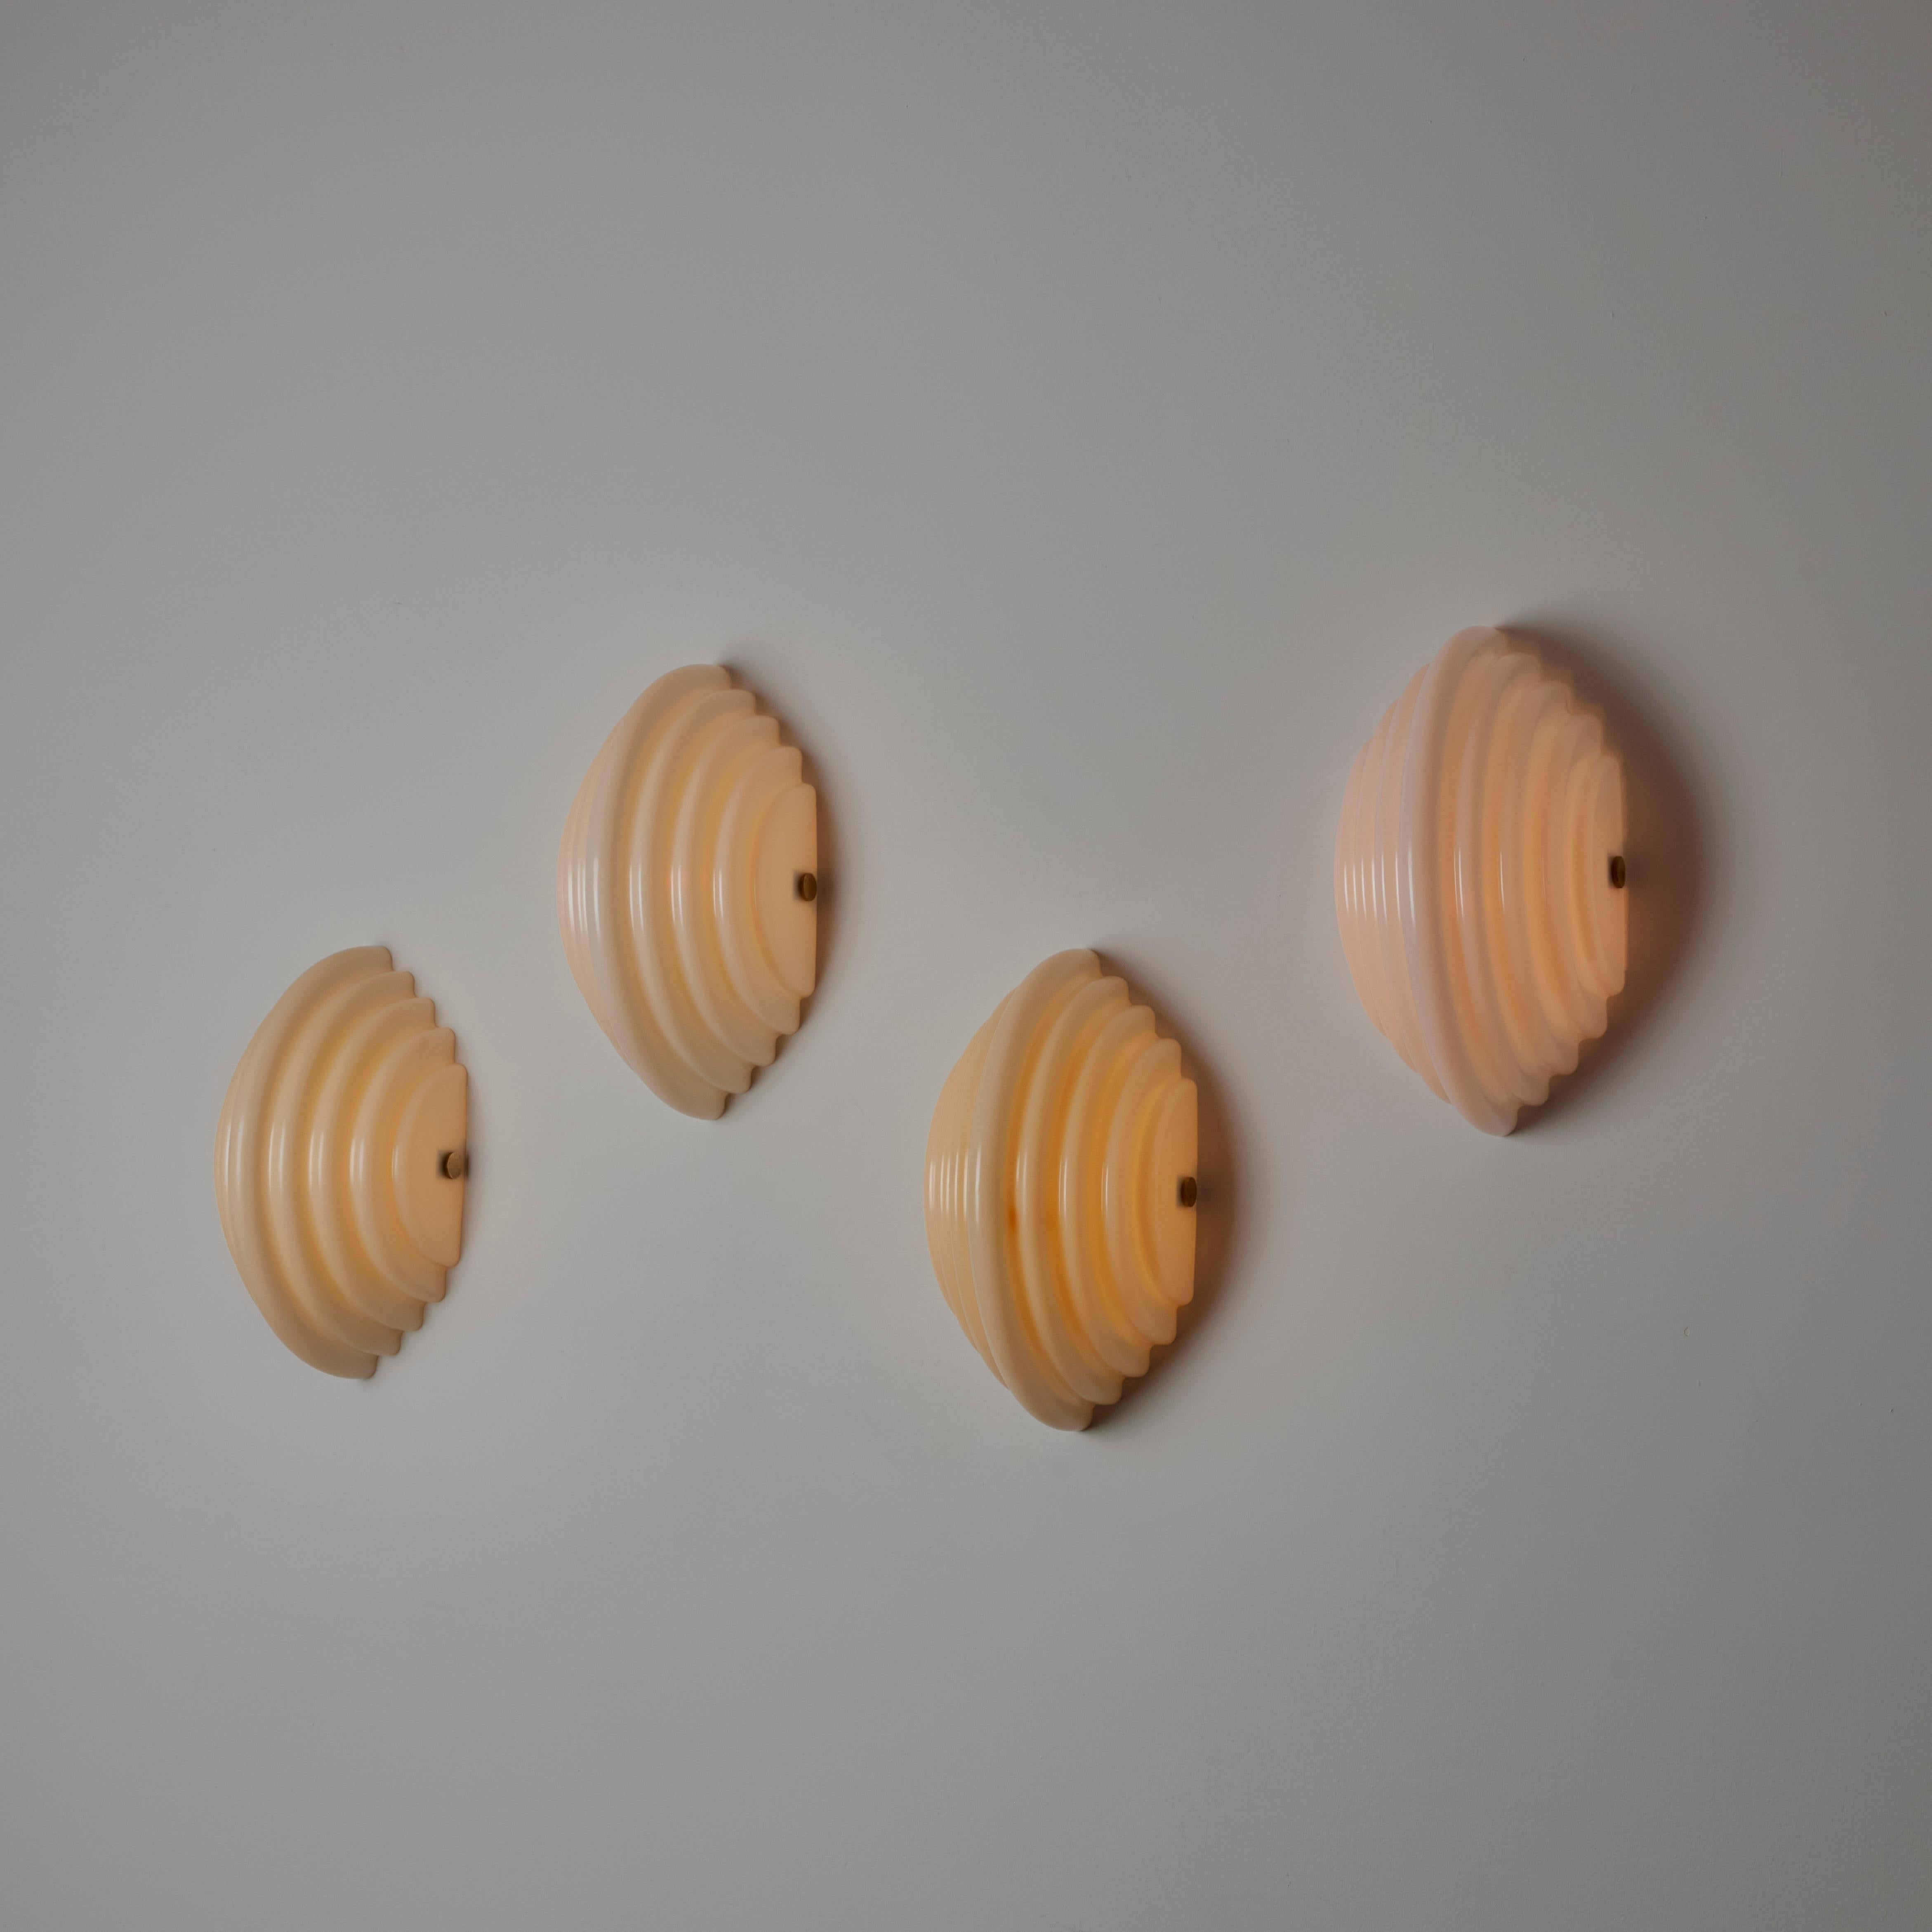 'Kai 2' sconces by Kazuhide Takahama for Sirrah. Designed and manufactured in Italy, circa the 1980s. Mollusc shaped molded acrylic shells make up the entire body of these contemporary sconces. Each sconce obtains a single E27 socket type, adapted